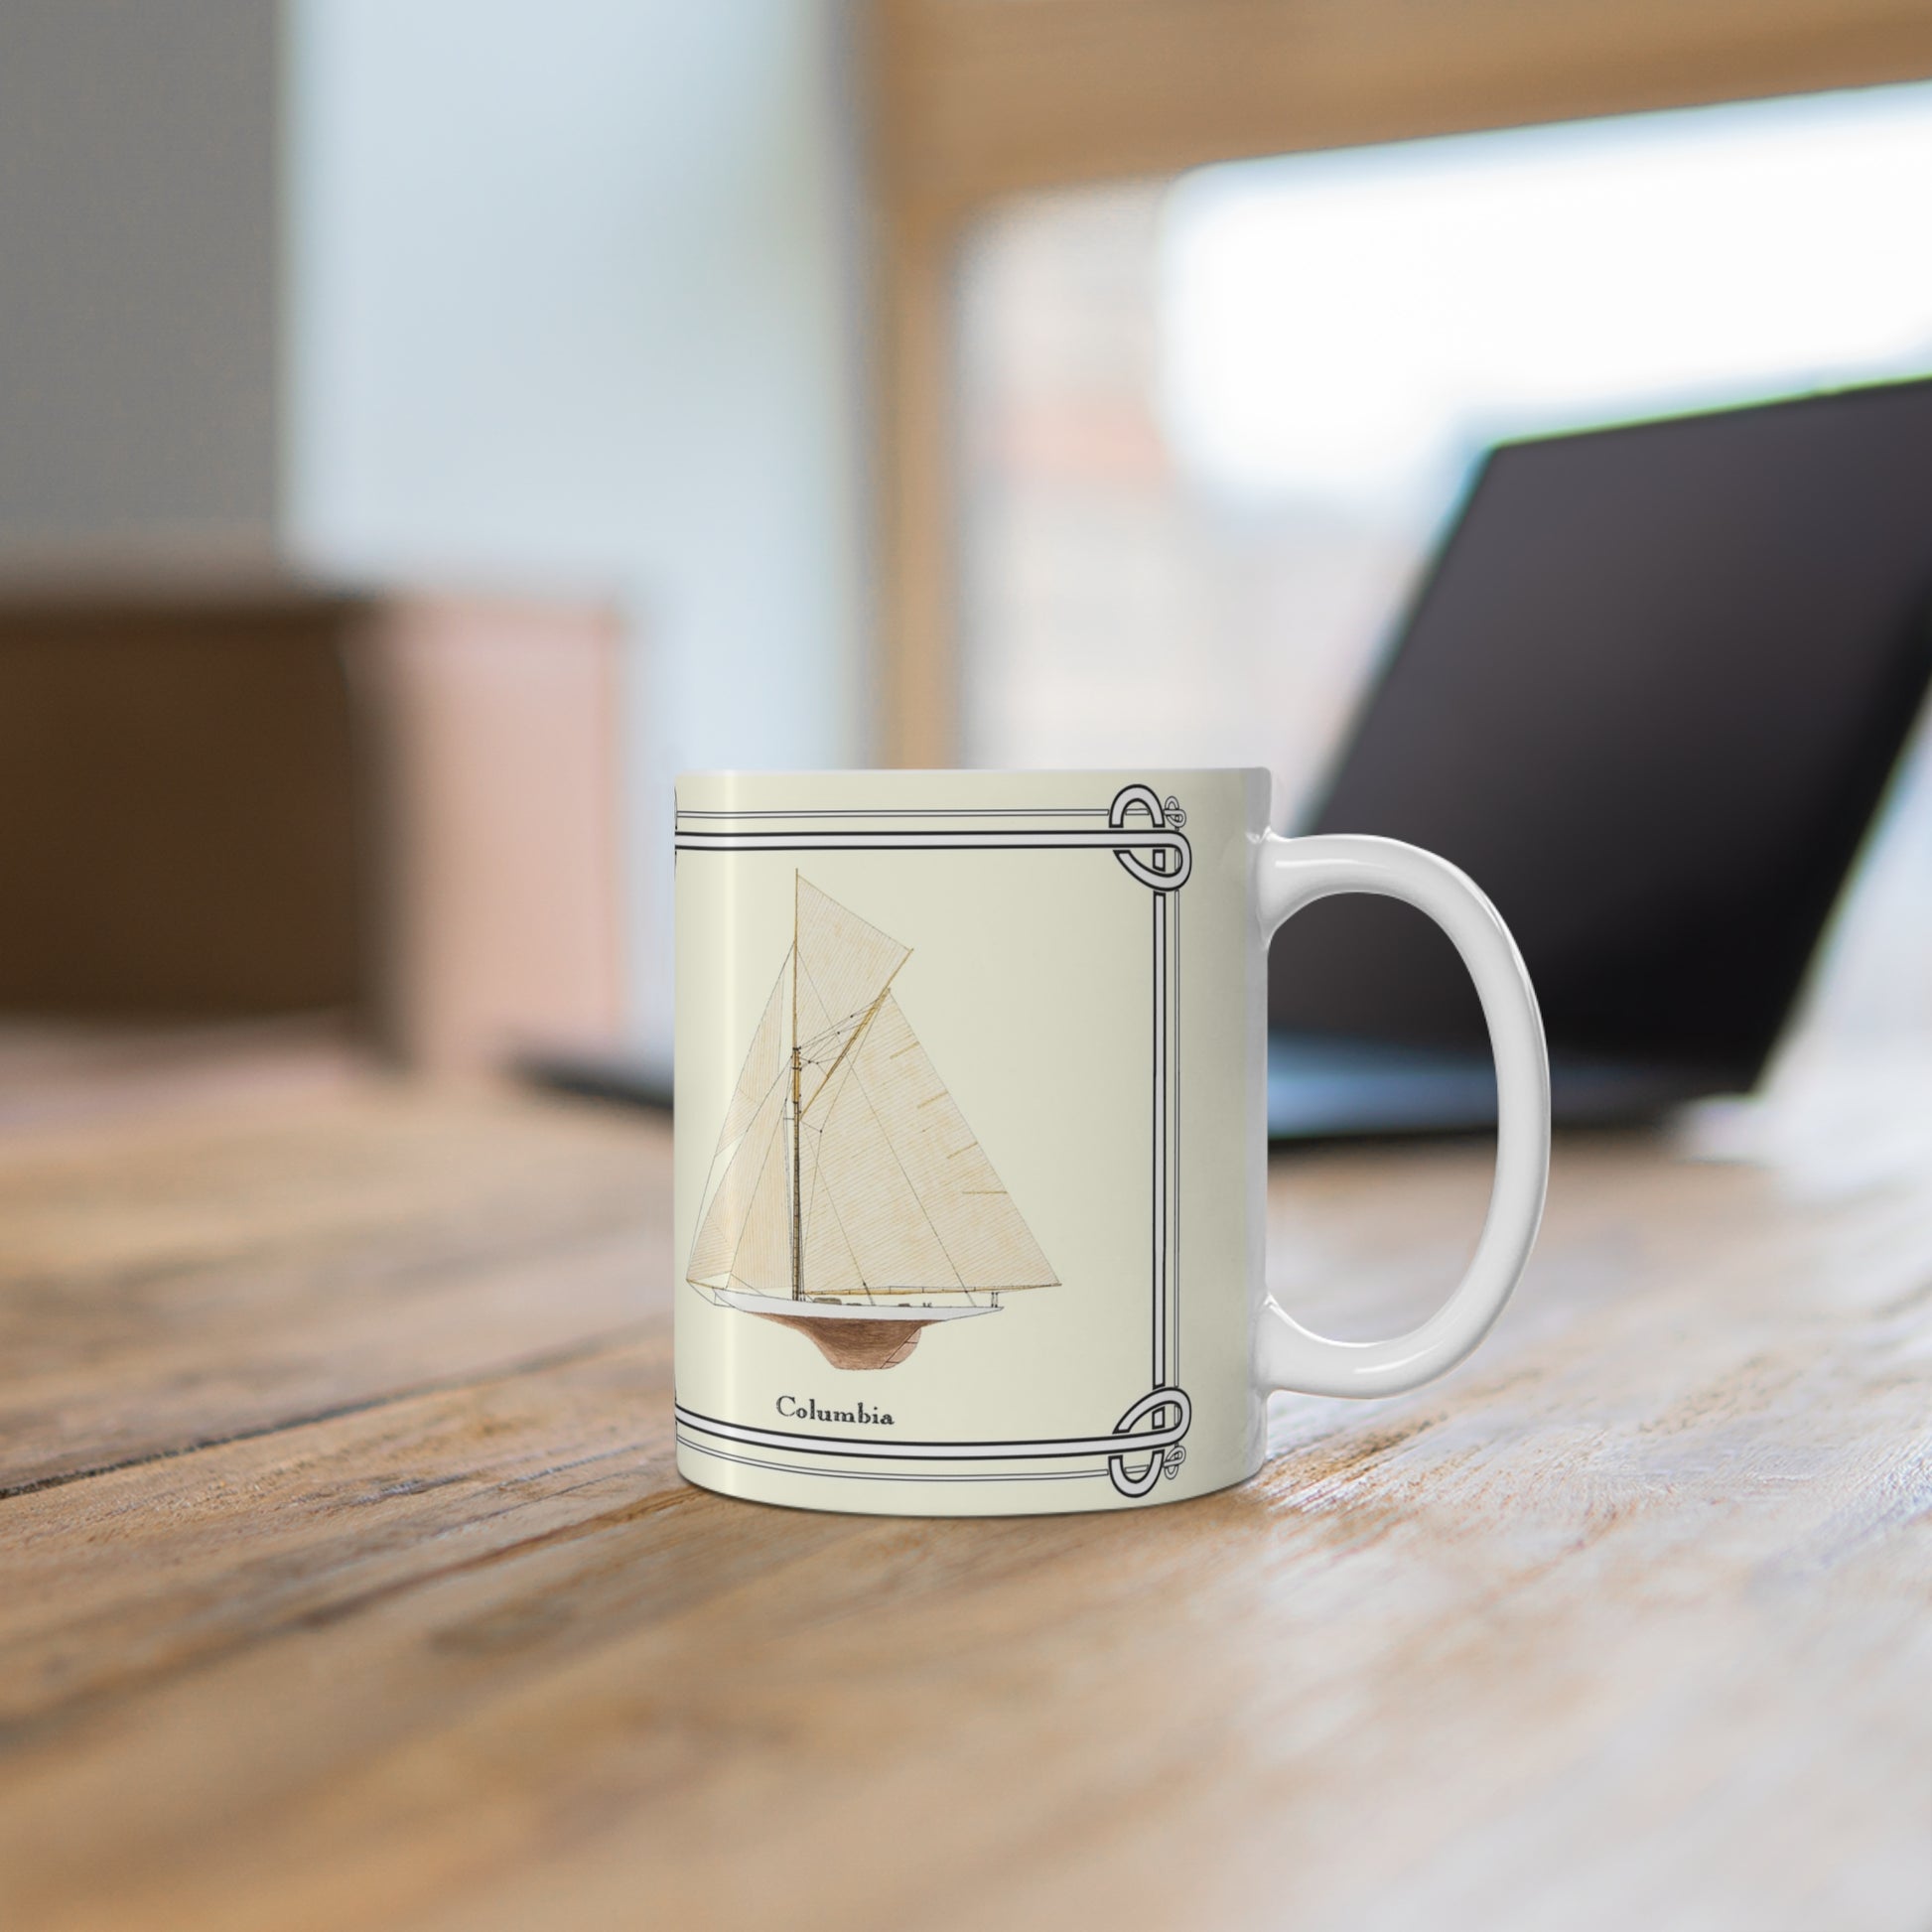 Enjoy your favorite beverage in the Columbia 11 oz. Mug. Perfect for anyone who enjoys sailing or naval history.